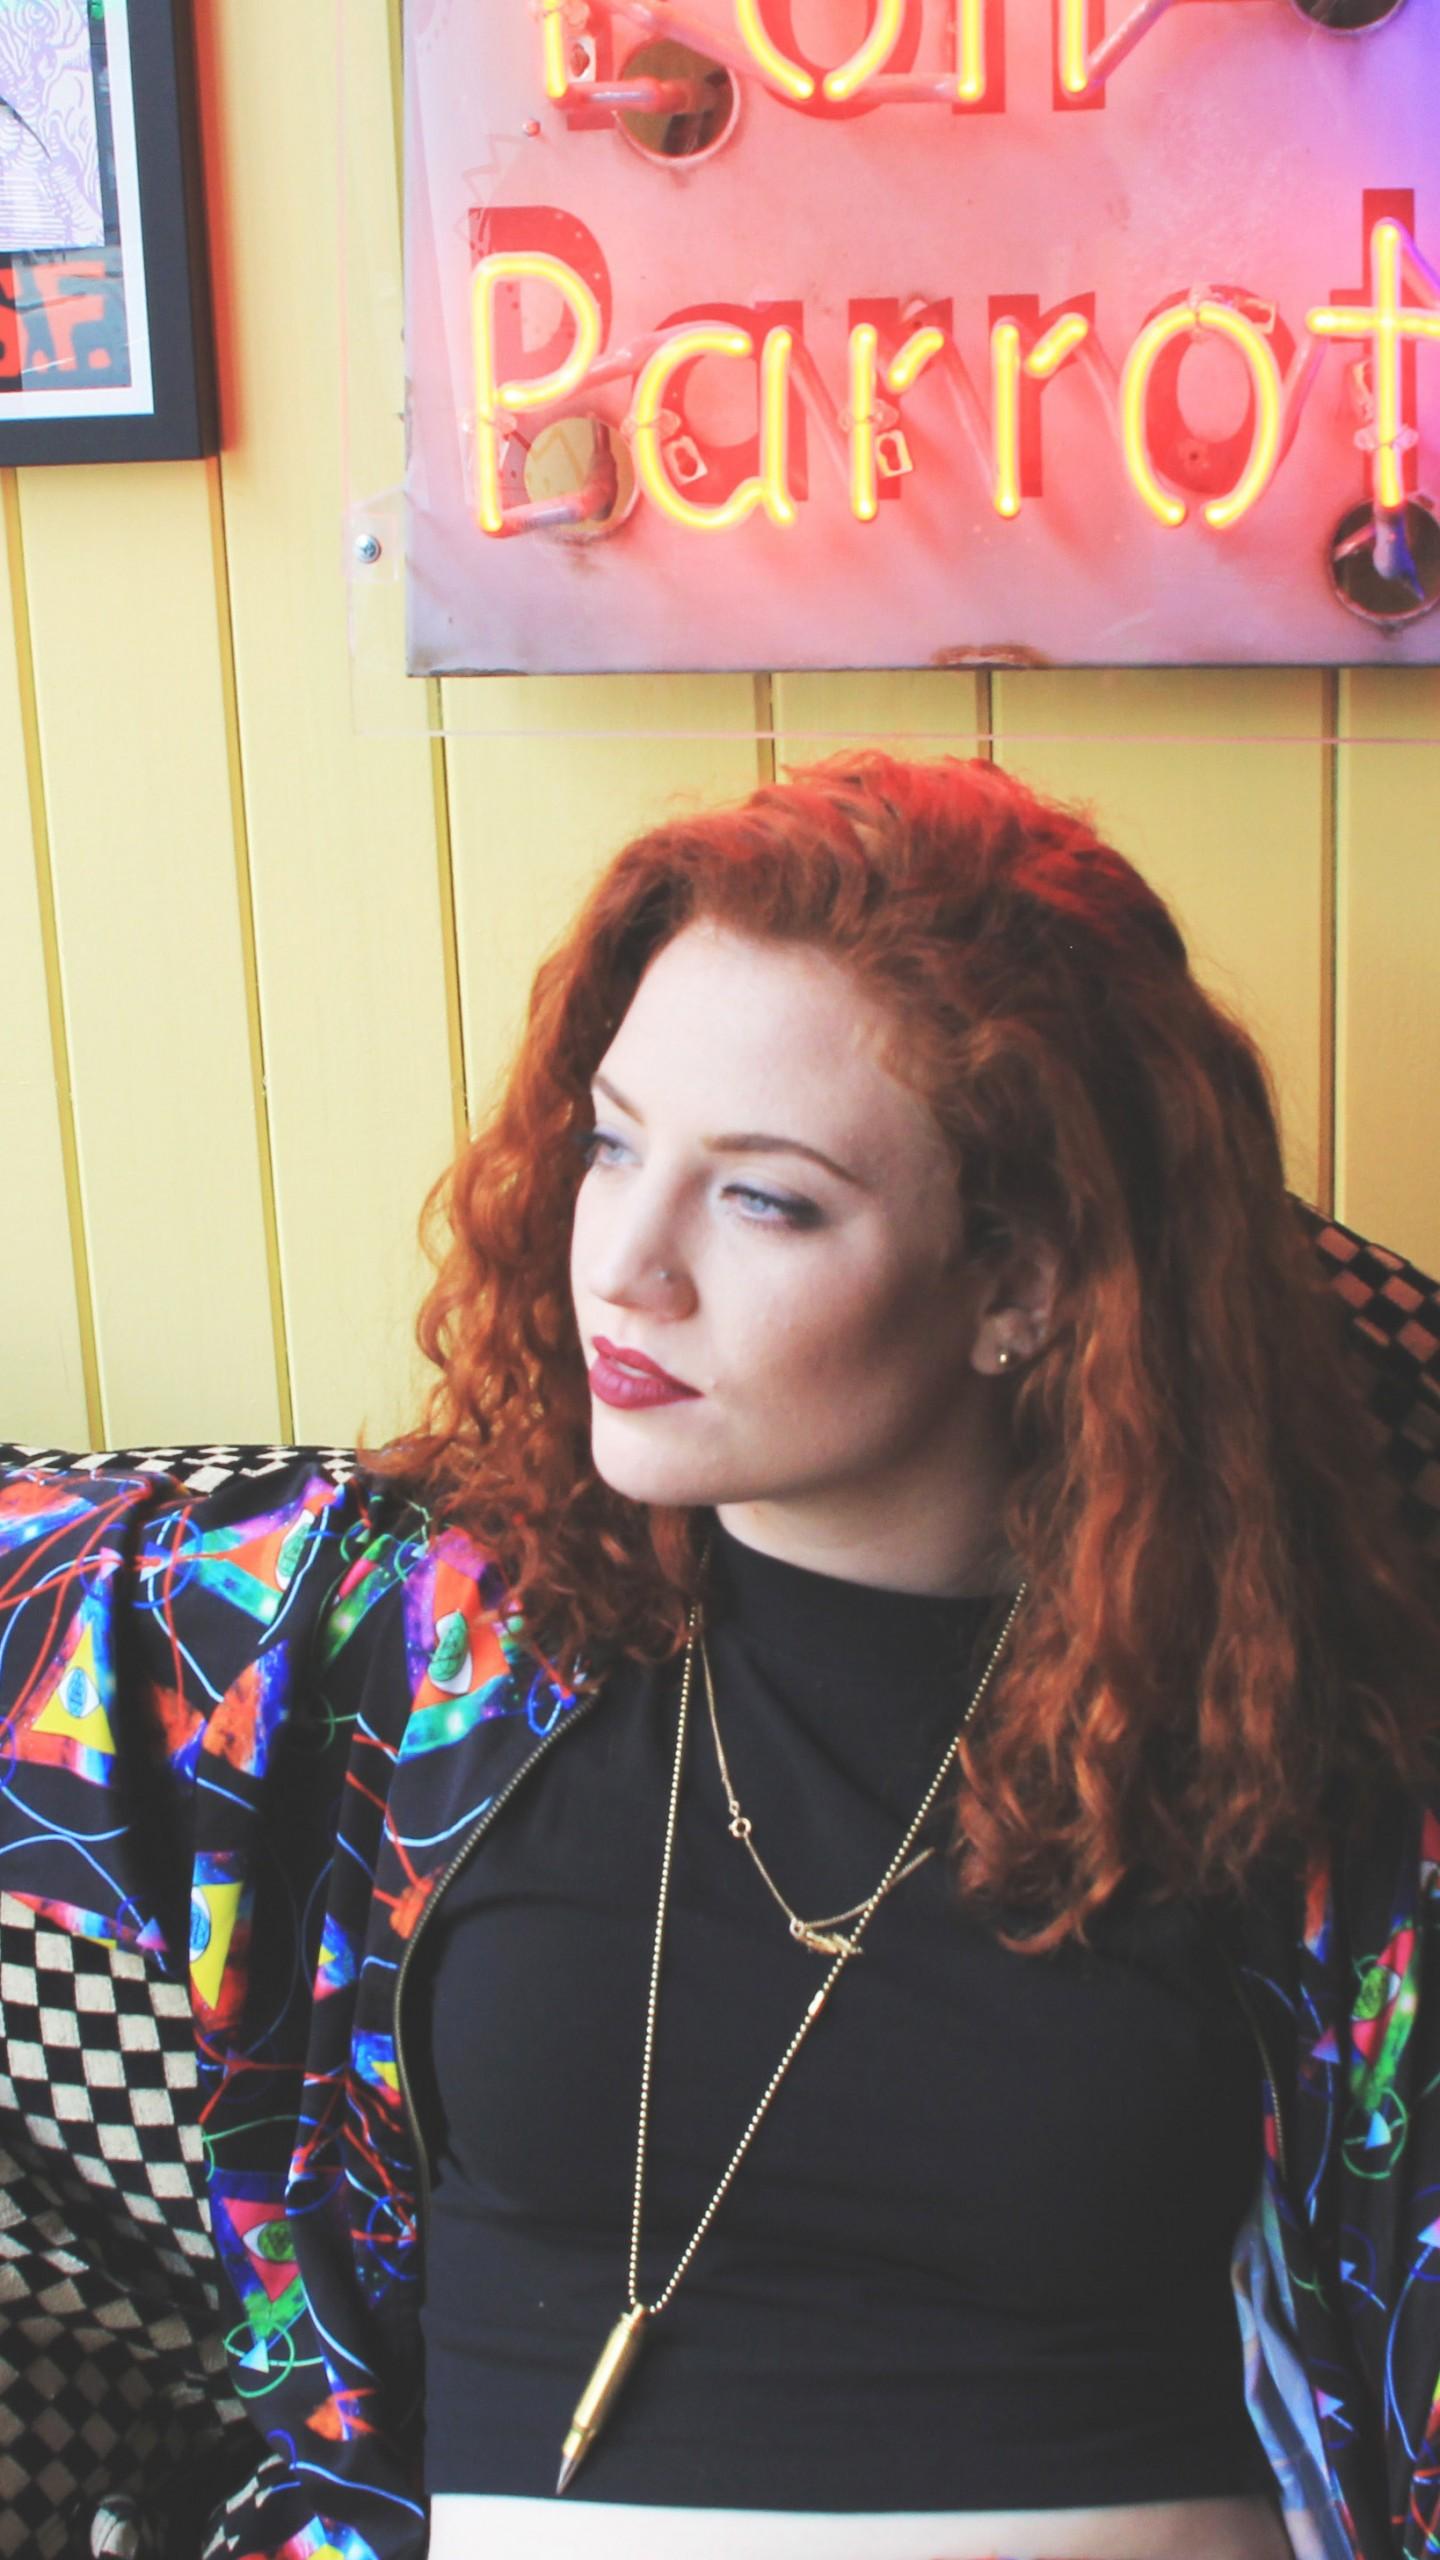 Wallpaper Jess Glynne, Top music artist and bands, red